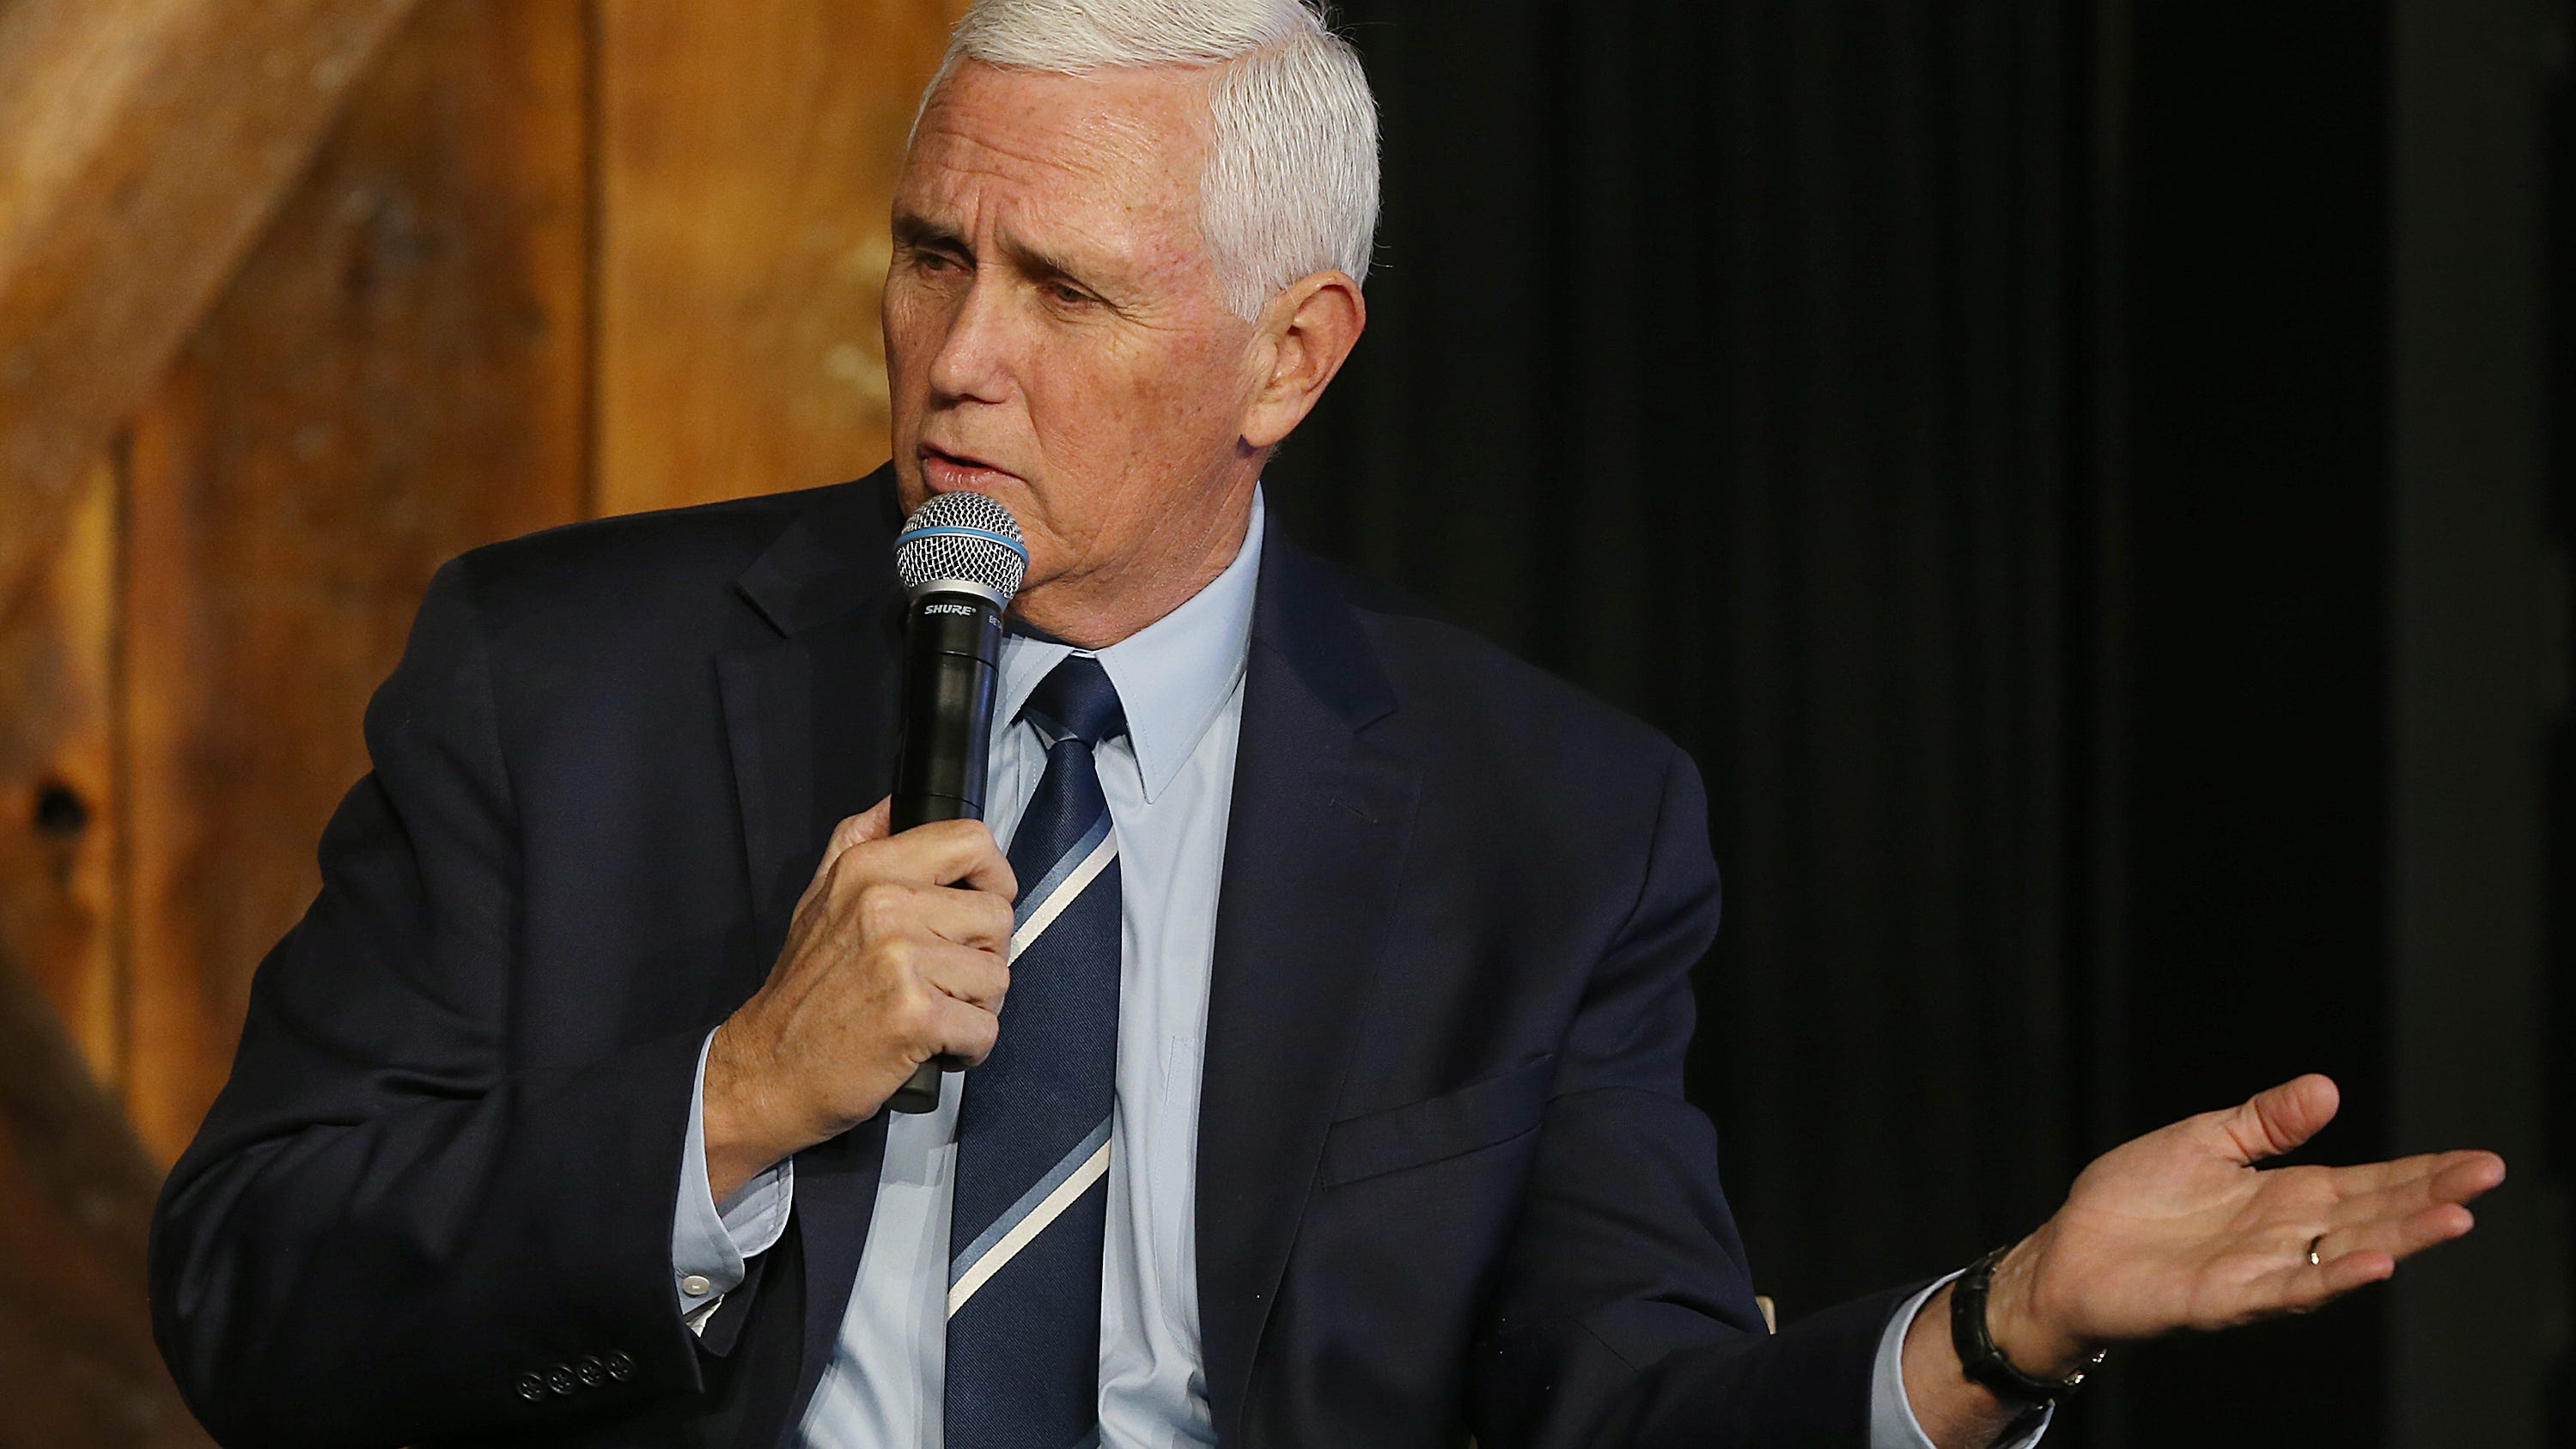 Former US vice president Mike Pence speaks during a panel discussion about America's strength and leadership abroad and its importance organized by The Bastion Institute at The River Center on Saturday, March 18, 2023, in Des Moines, Iowa.